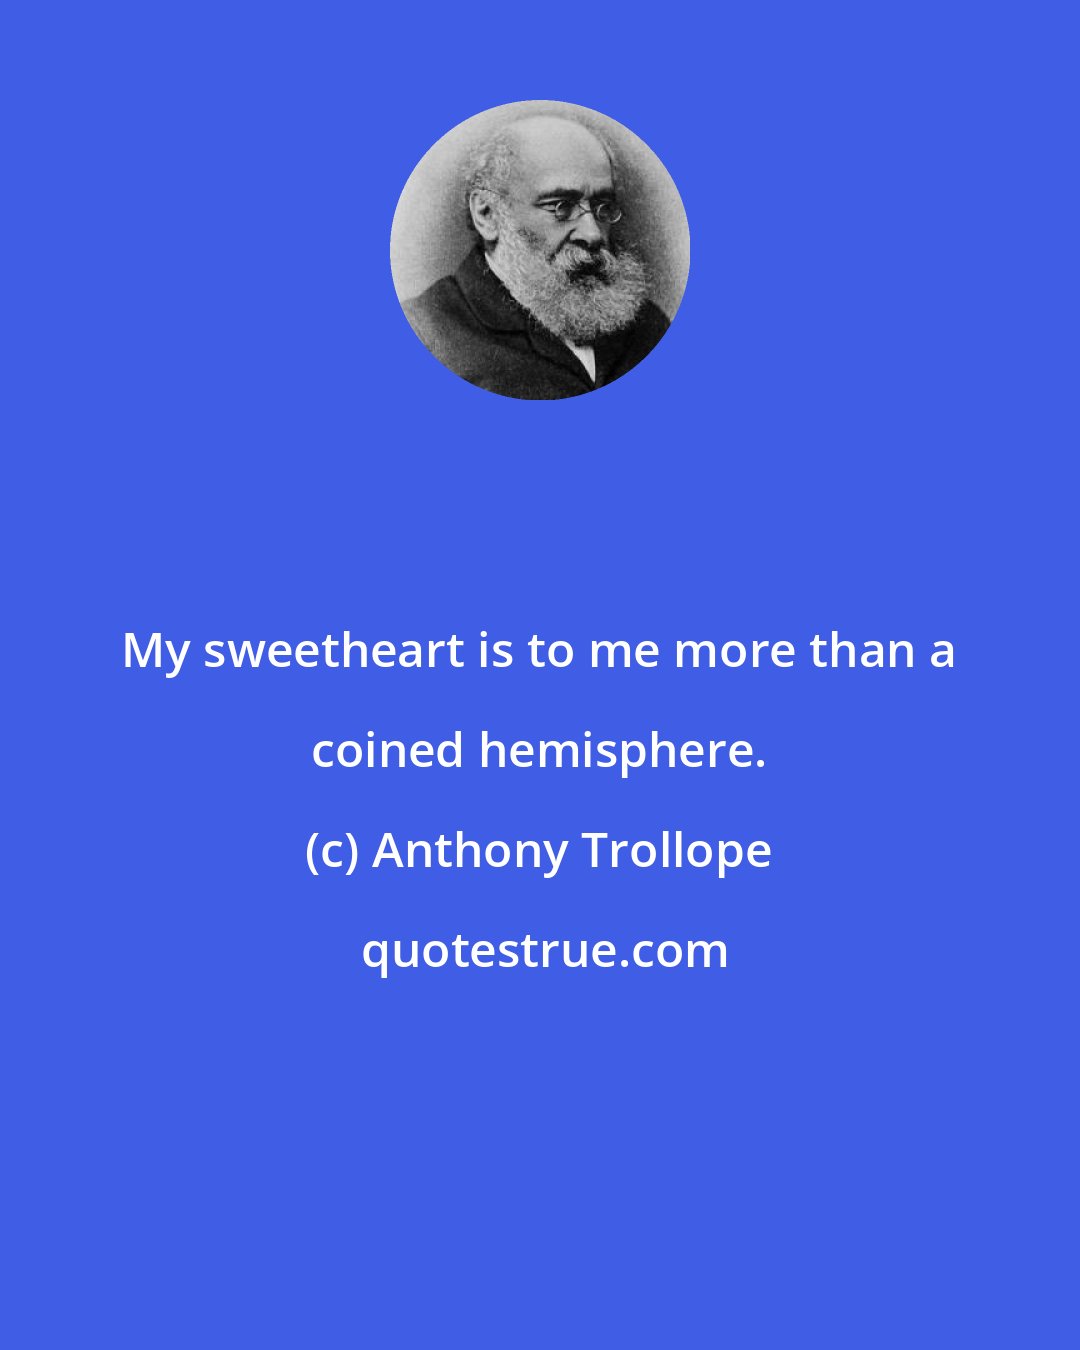 Anthony Trollope: My sweetheart is to me more than a coined hemisphere.